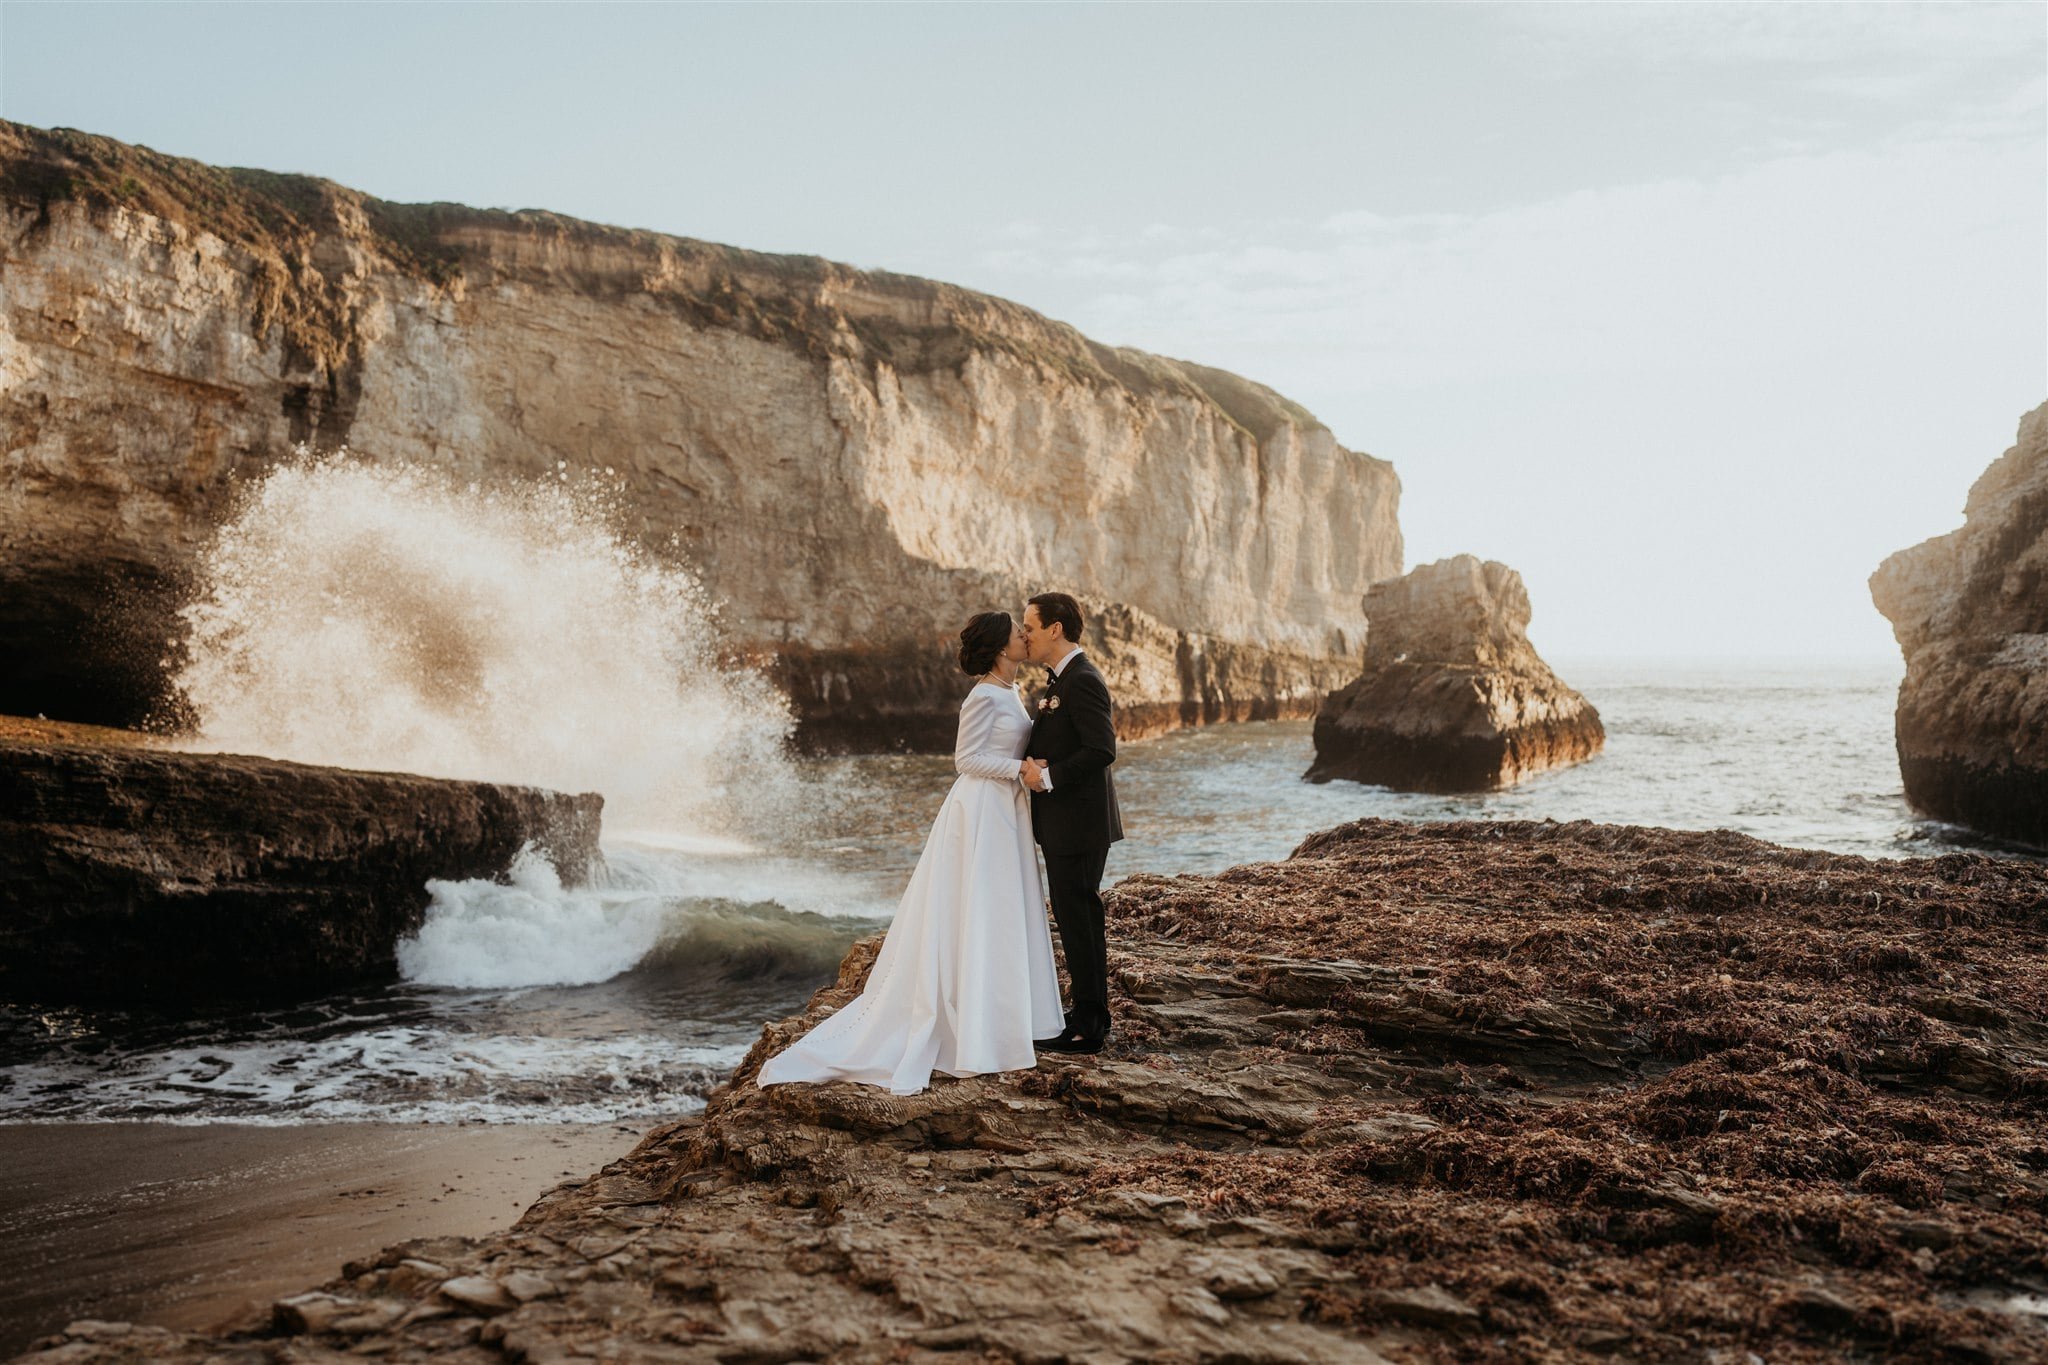 Bride and groom kiss while waves crash against the cliffs in the background